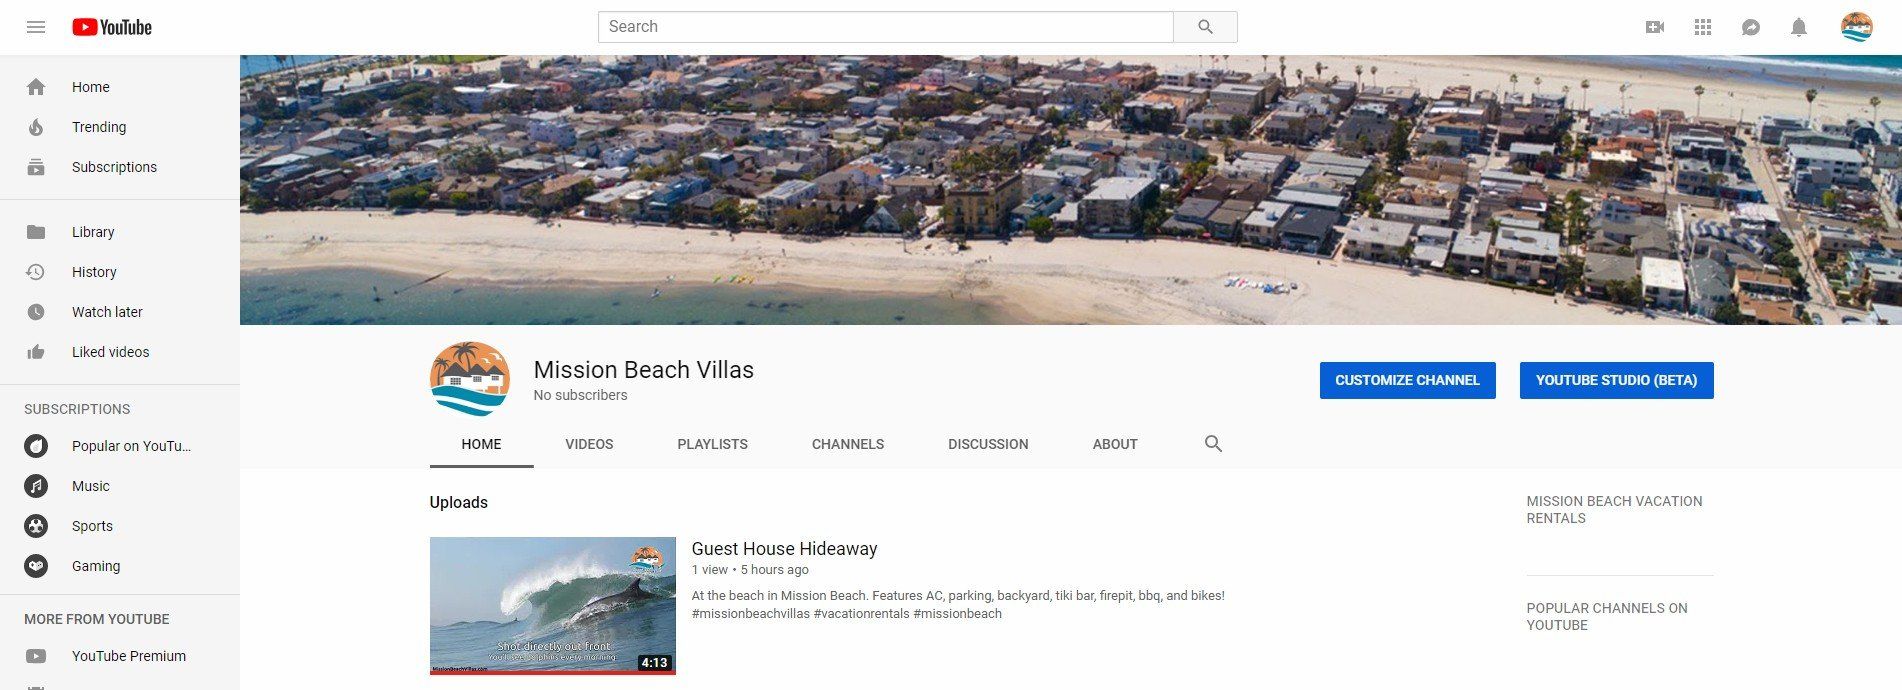 YouTube Channel - Vacation Rentals